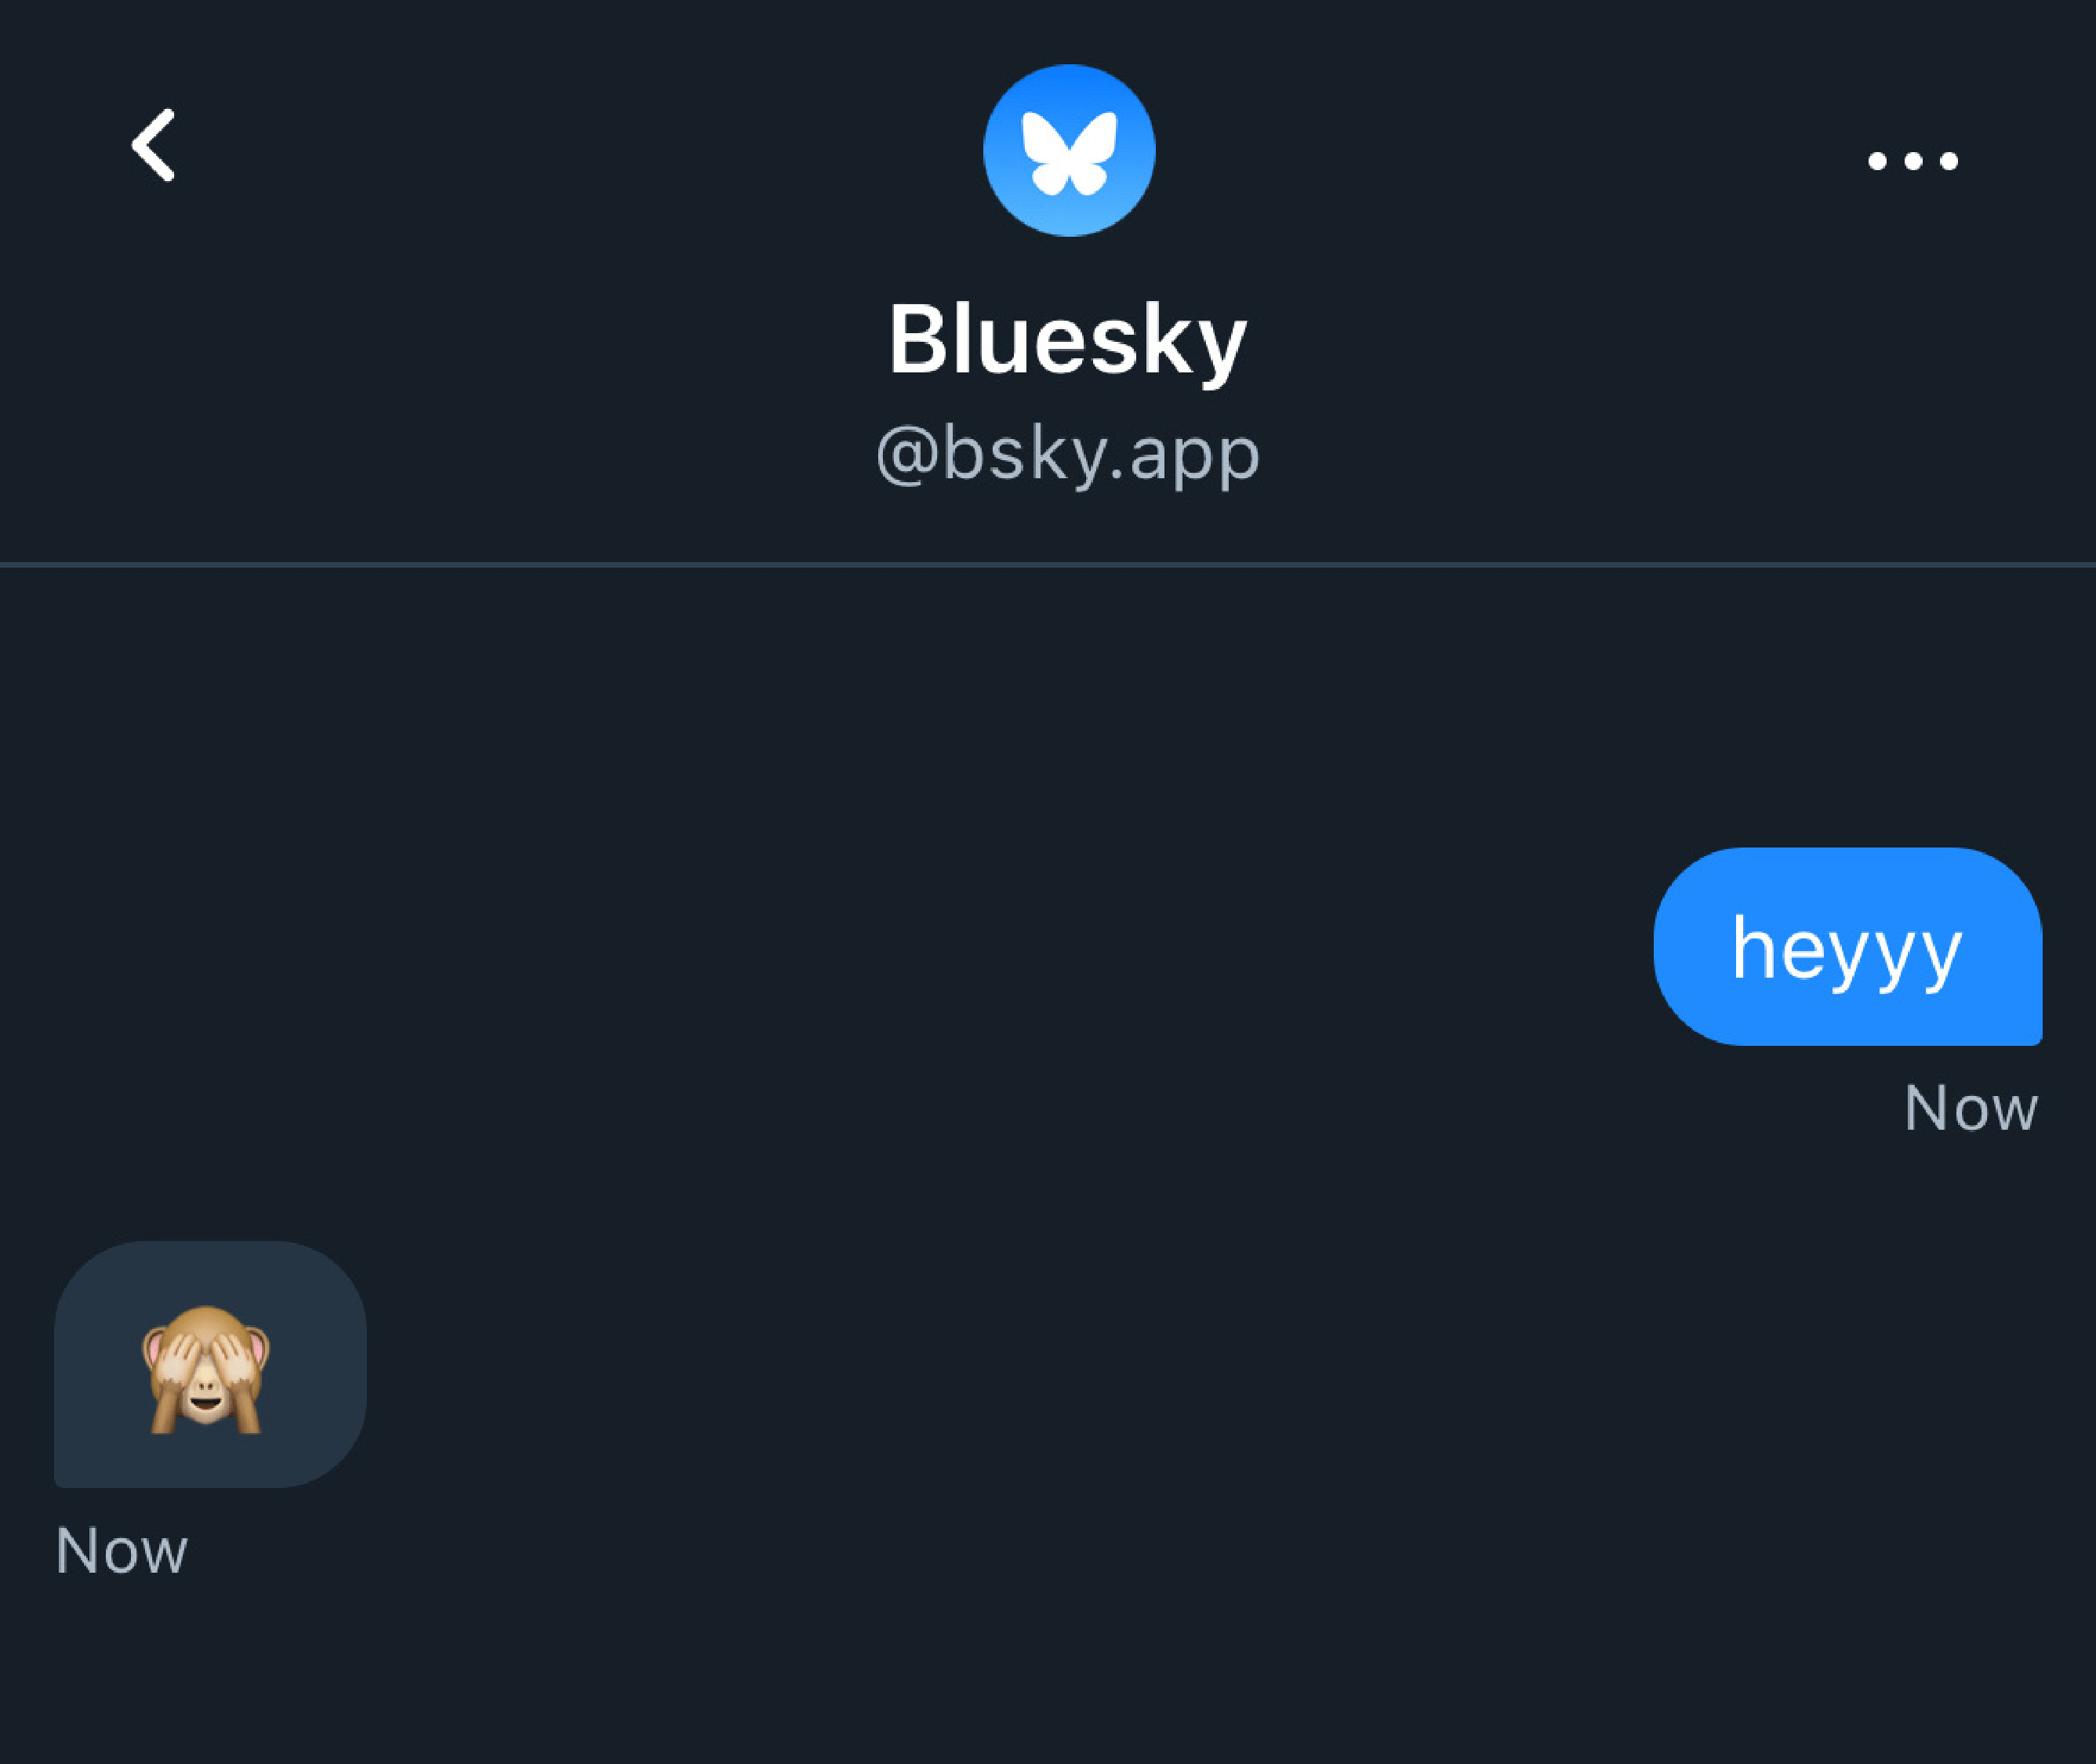 Bluesky Users Can Now Send DMs